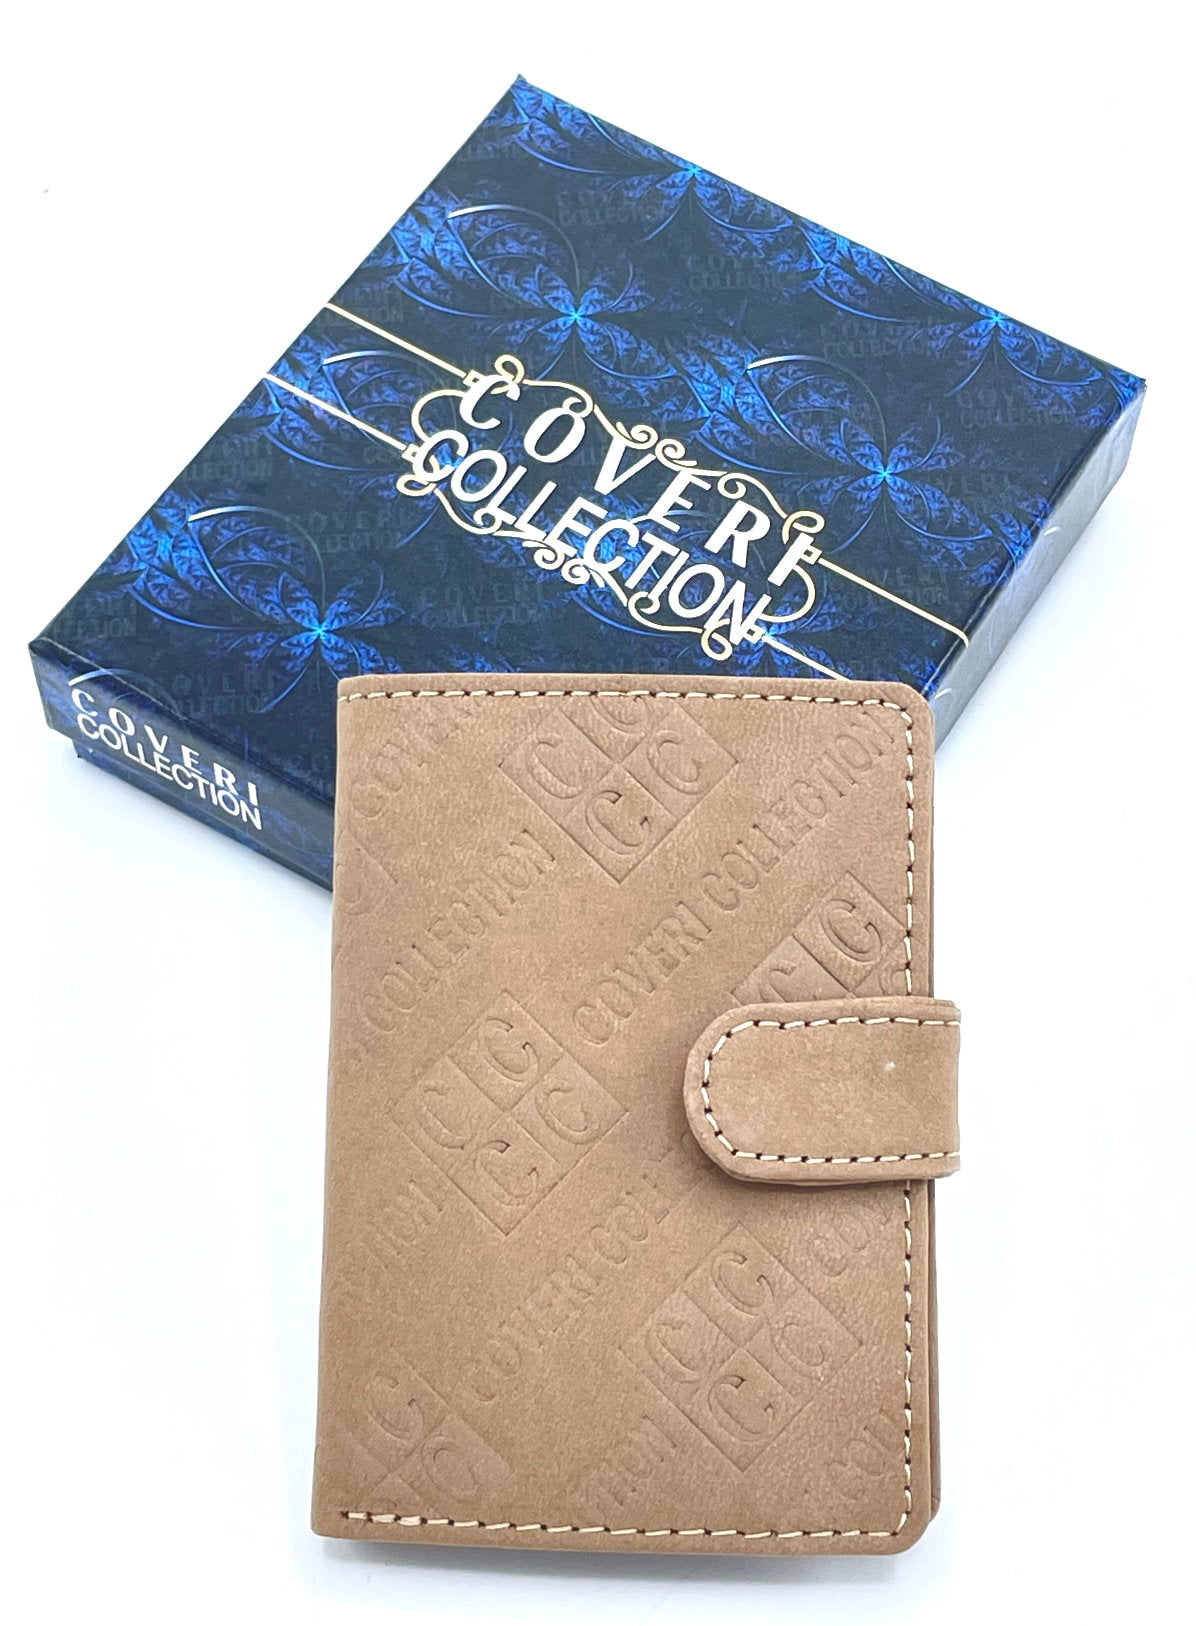 Genuine leather card holder, Brand Coveri Collection, art. 515058.335